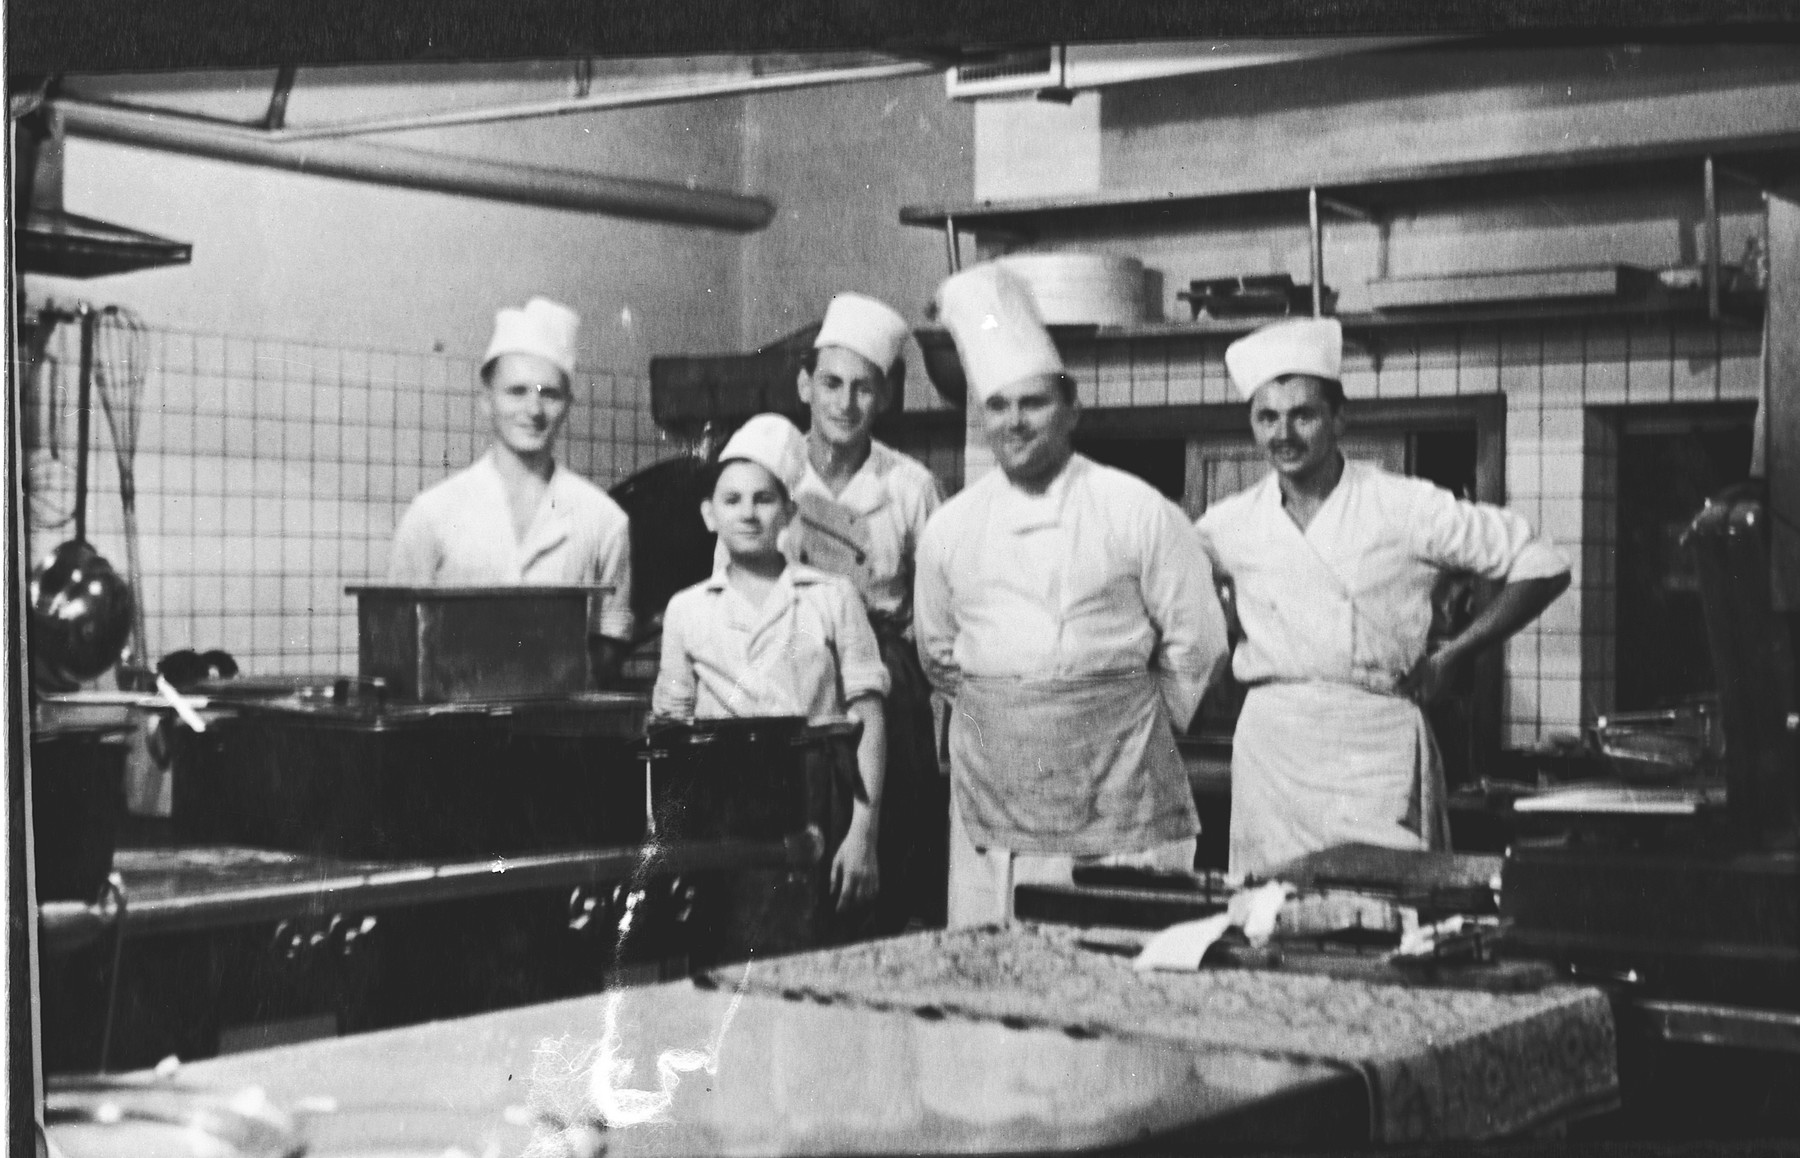 Group portrait of cooks in a kitchen in Prague during the Nazi occupation.

Among those pictured is Edgar Krasa, who was working as an apprentice chef.